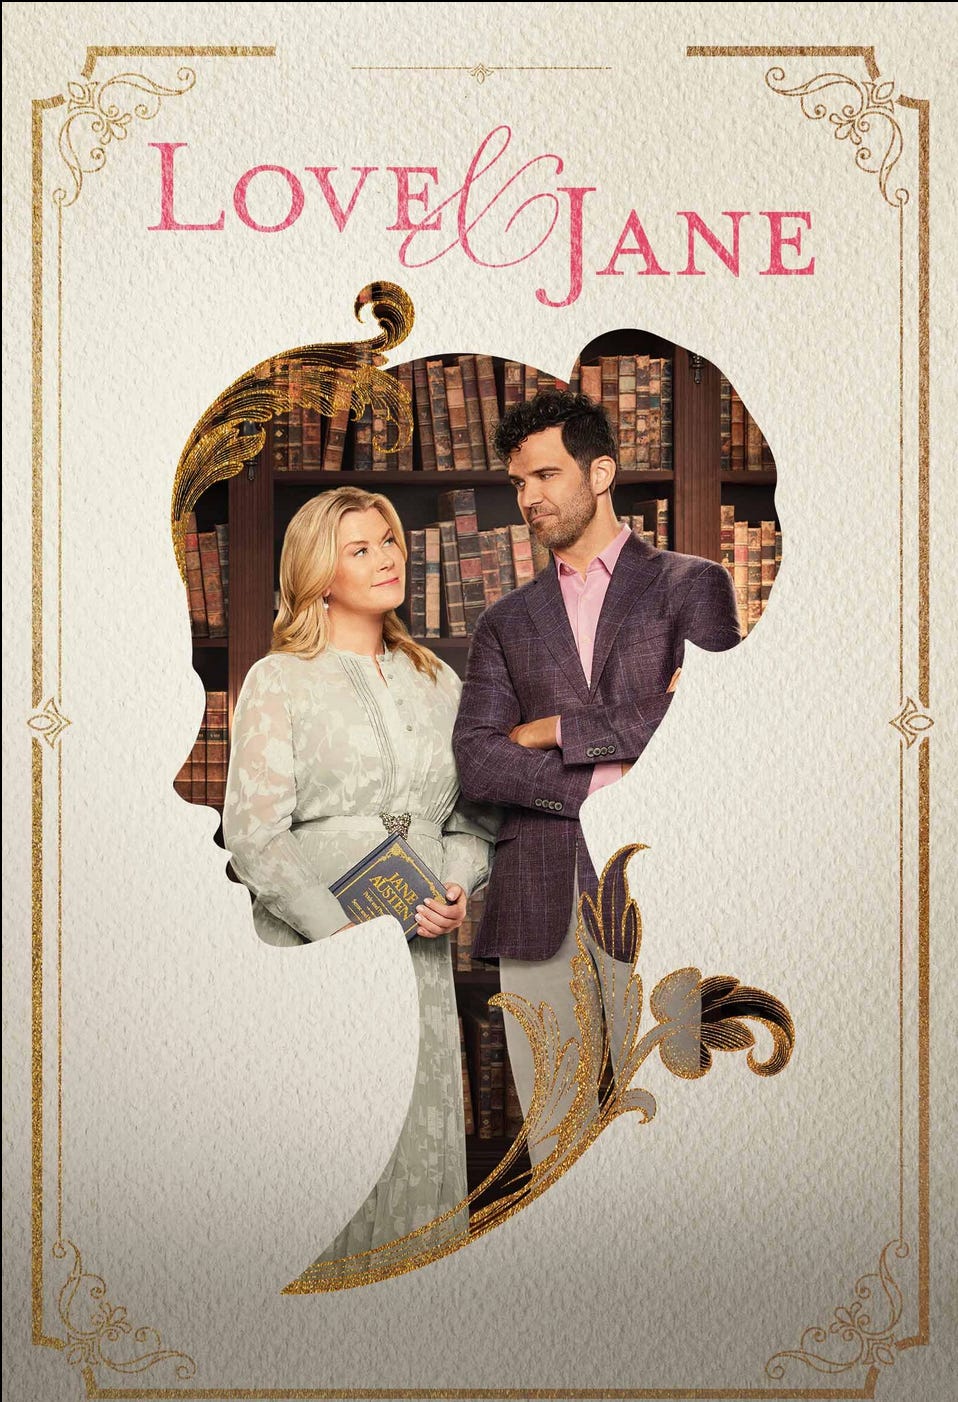 cover image for the movie "Love & Jane"